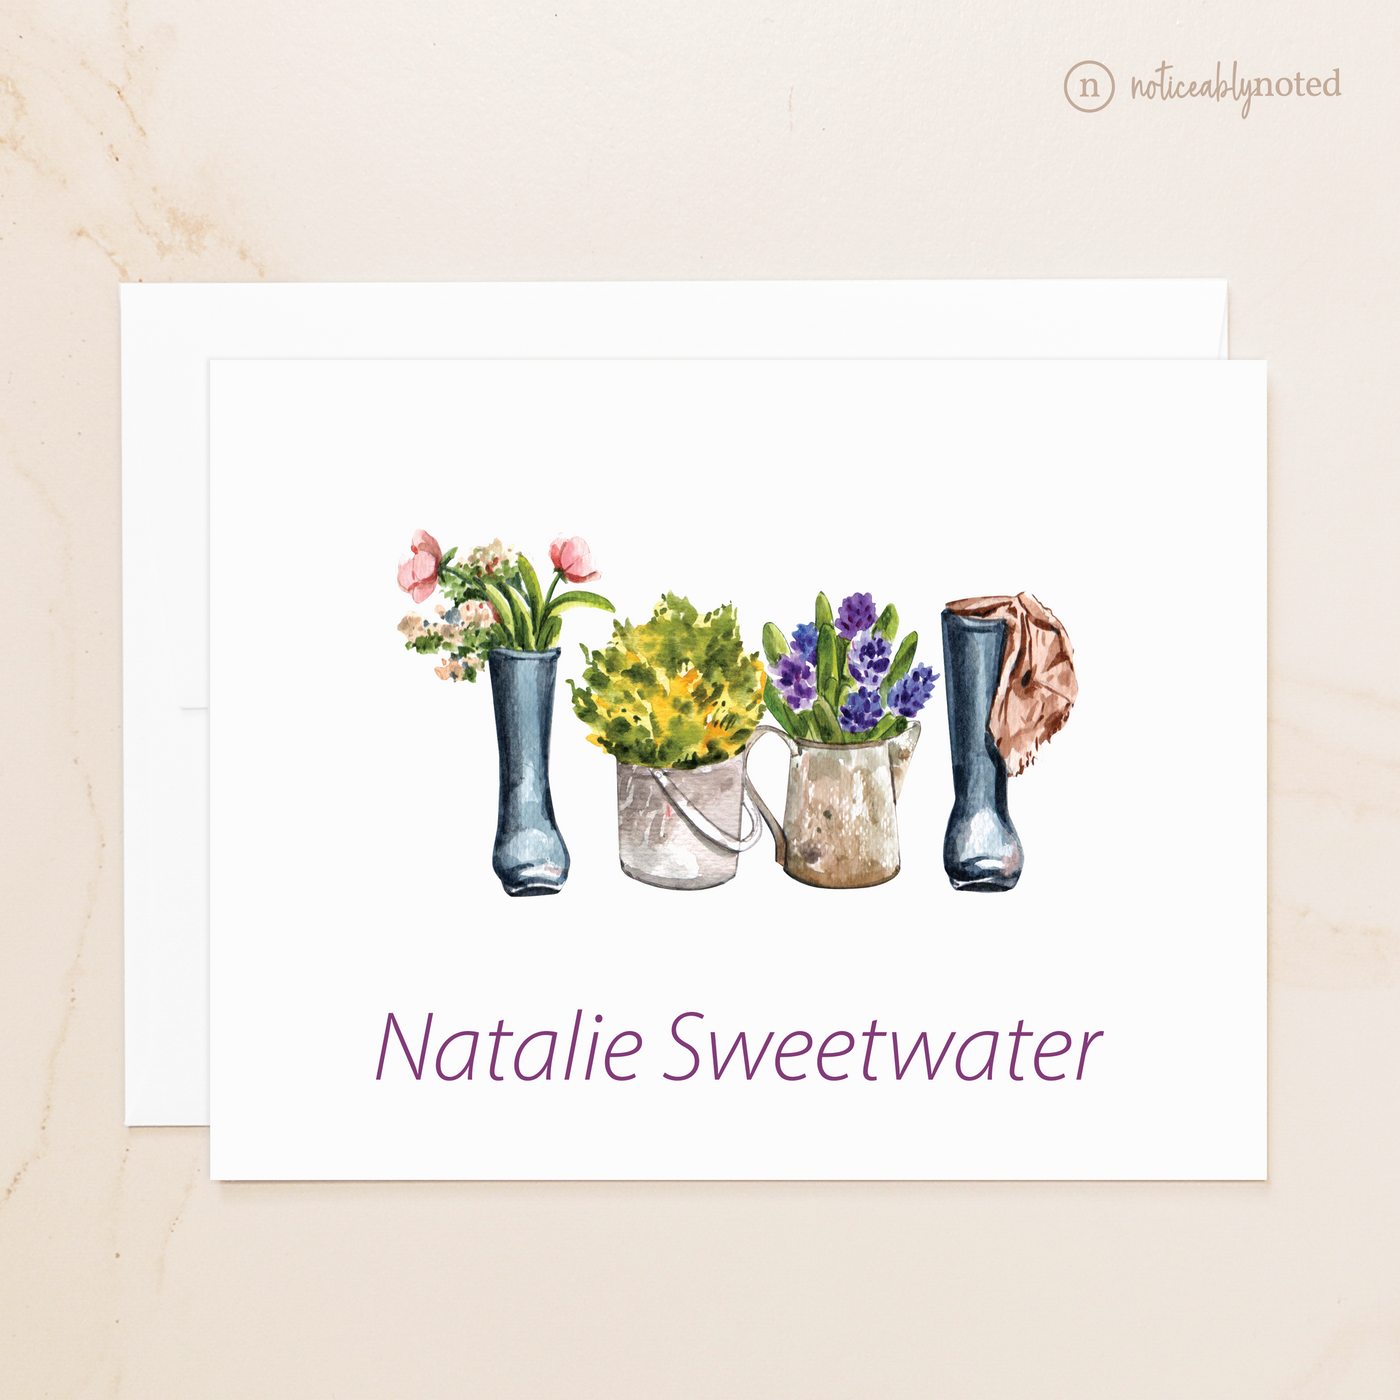 Gardening Boots Personalized Folded Note Cards